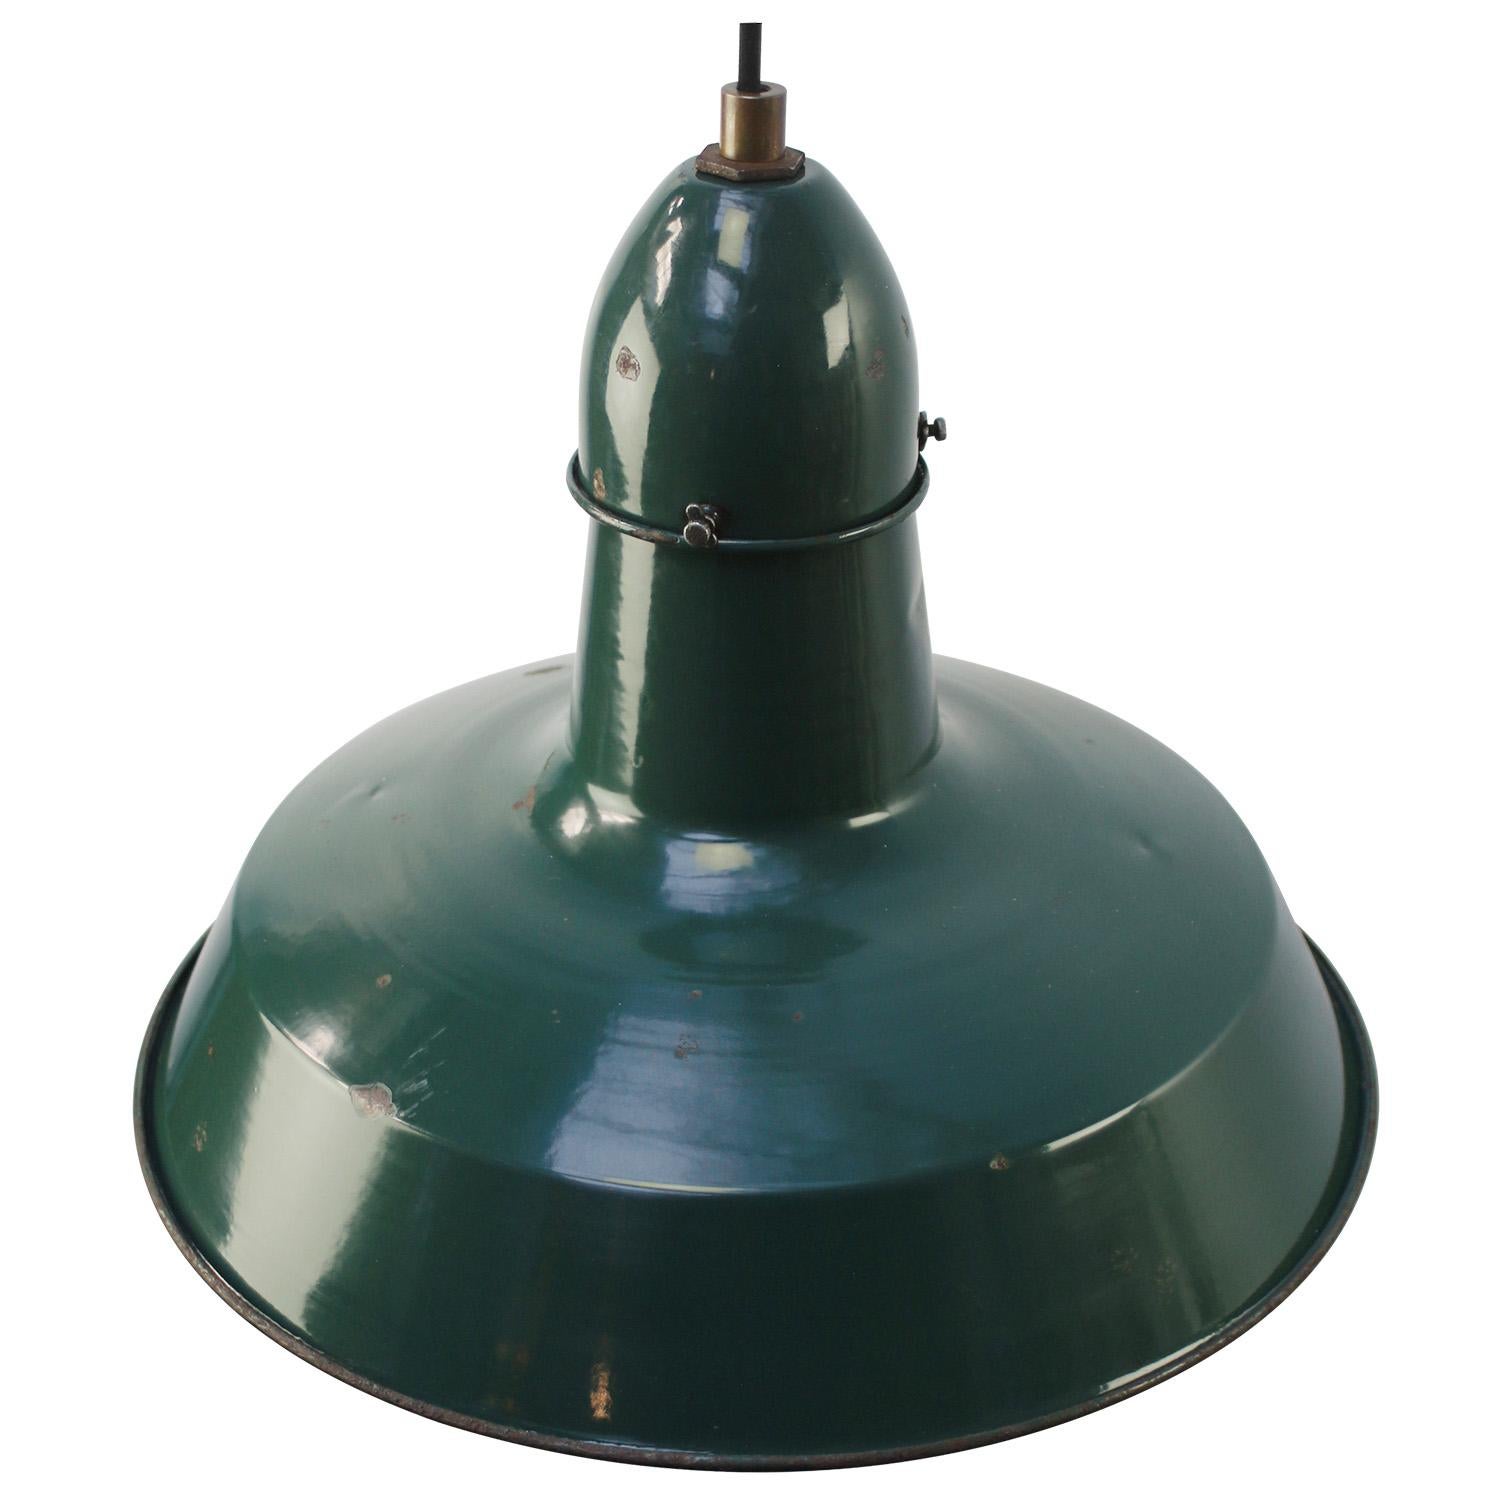 French factory pendant by Sammode, France
dark petrol green enamel white interior
Brass top

Weight: 2.10 kg / 4.6 lb

Priced per individual item. All lamps have been made suitable by international standards for incandescent light bulbs,